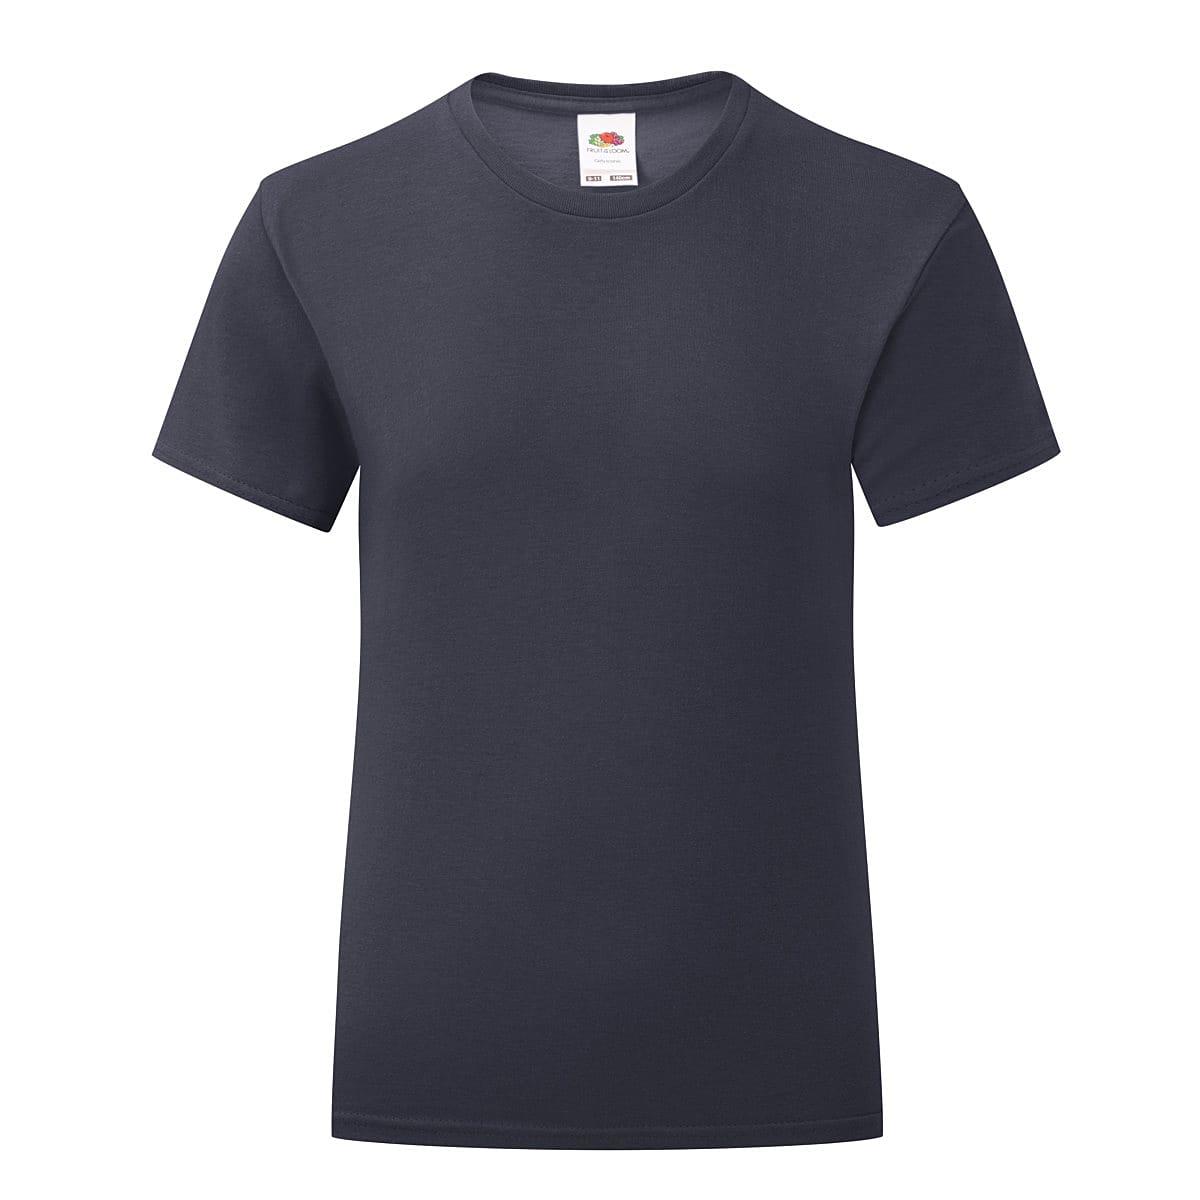 Fruit Of The Loom Girls Iconic T-Shirt in Deep Navy (Product Code: 61025)